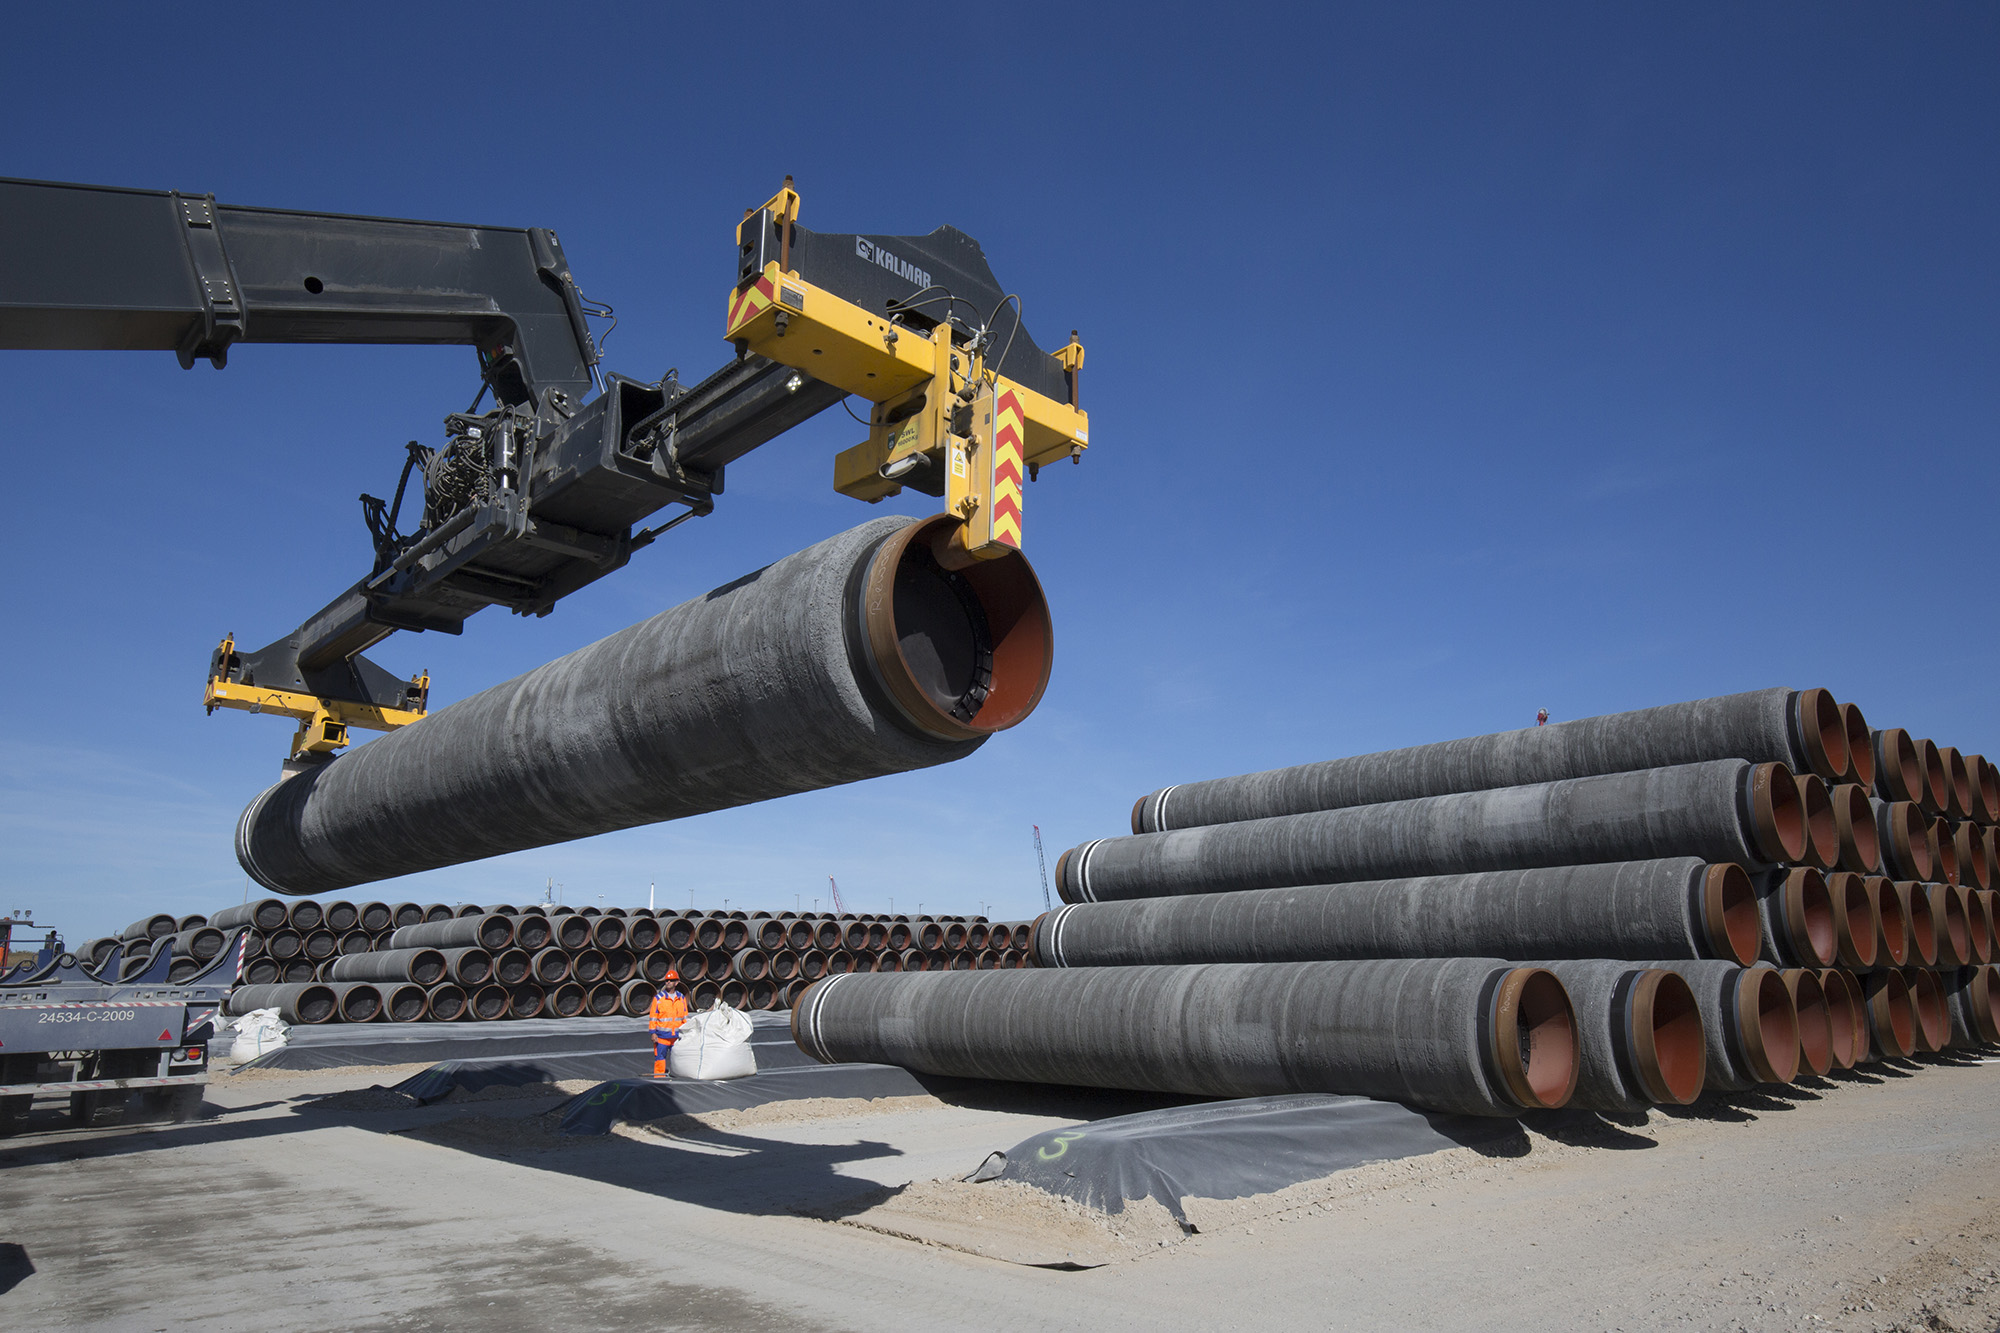 Large pipes, sheathed with a concrete iron ore mixture, for the Baltic Sea pipeline Nord Stream 2 are positioned at a storage area in the ferry port of Sassnitz/Neu Mukran in Germany on June 5, 2018.